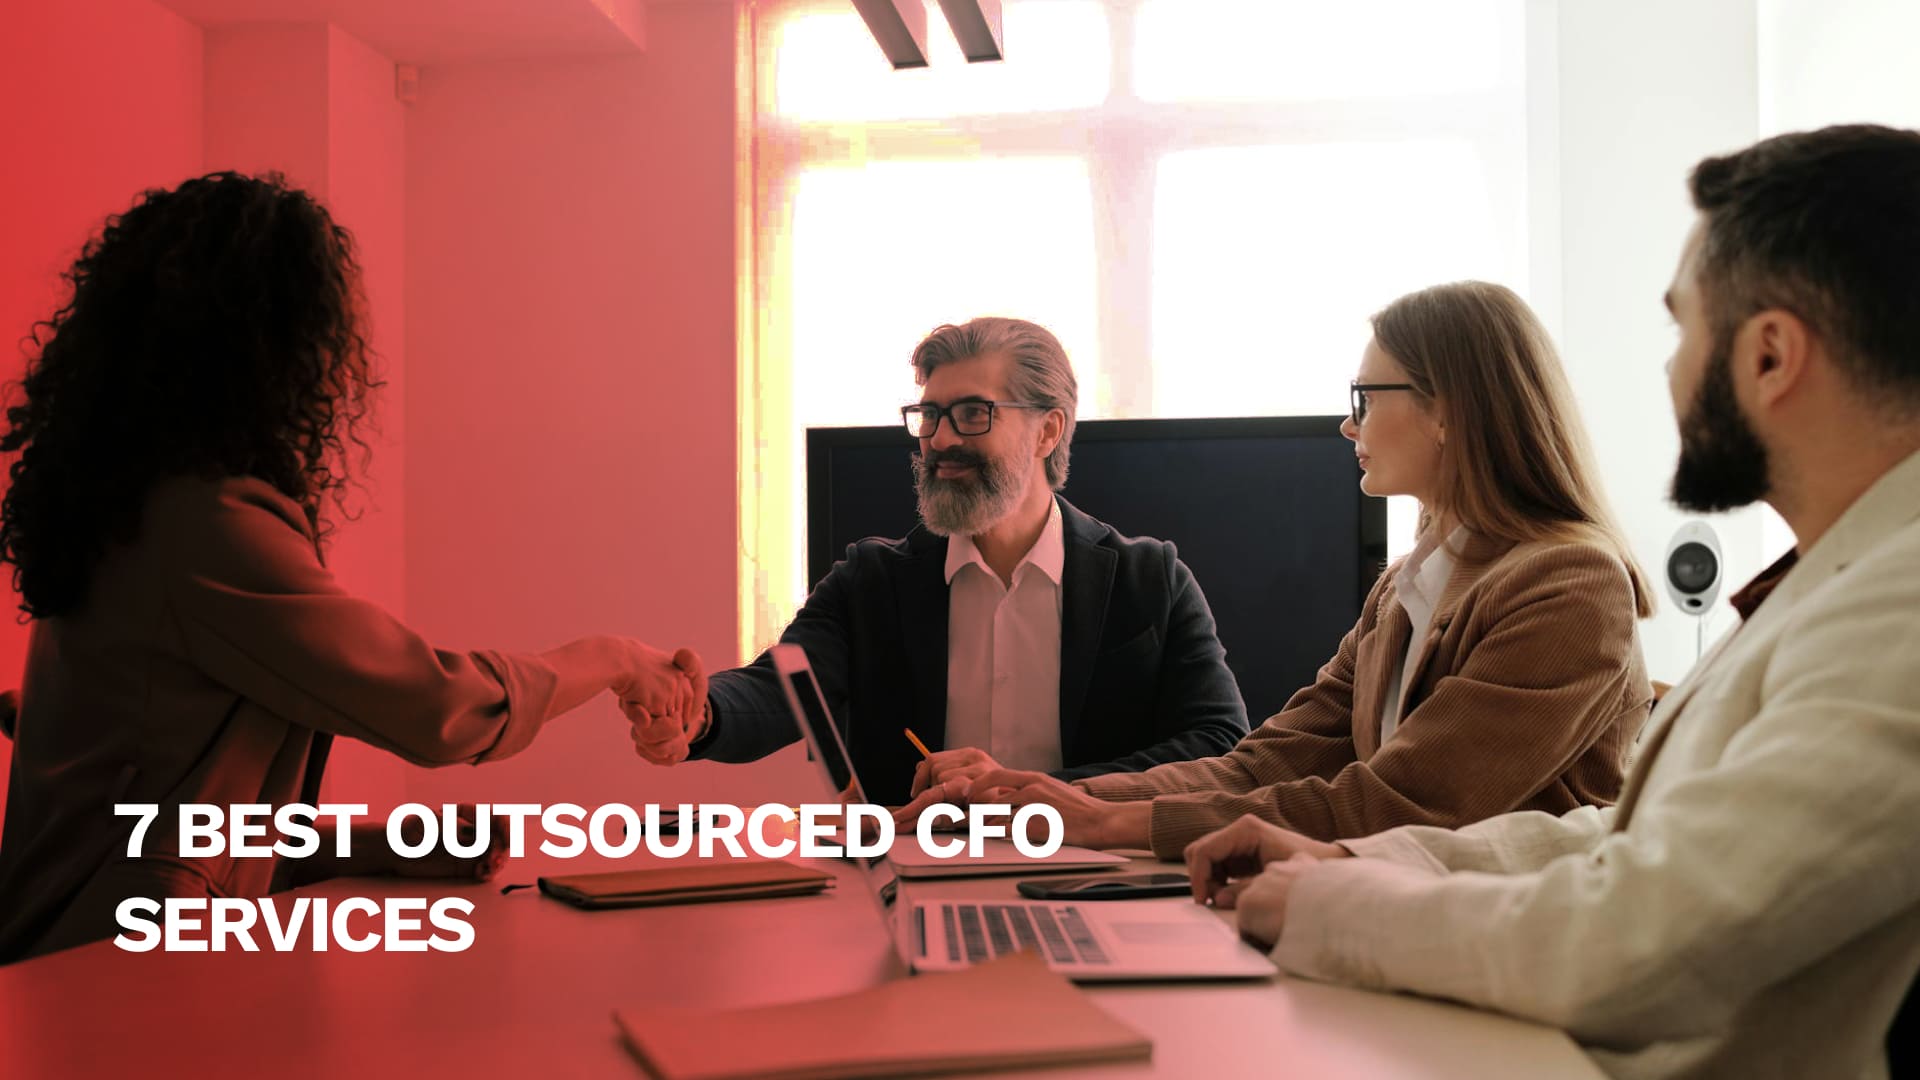 7 Best Outsourced CFO Services For Your Business